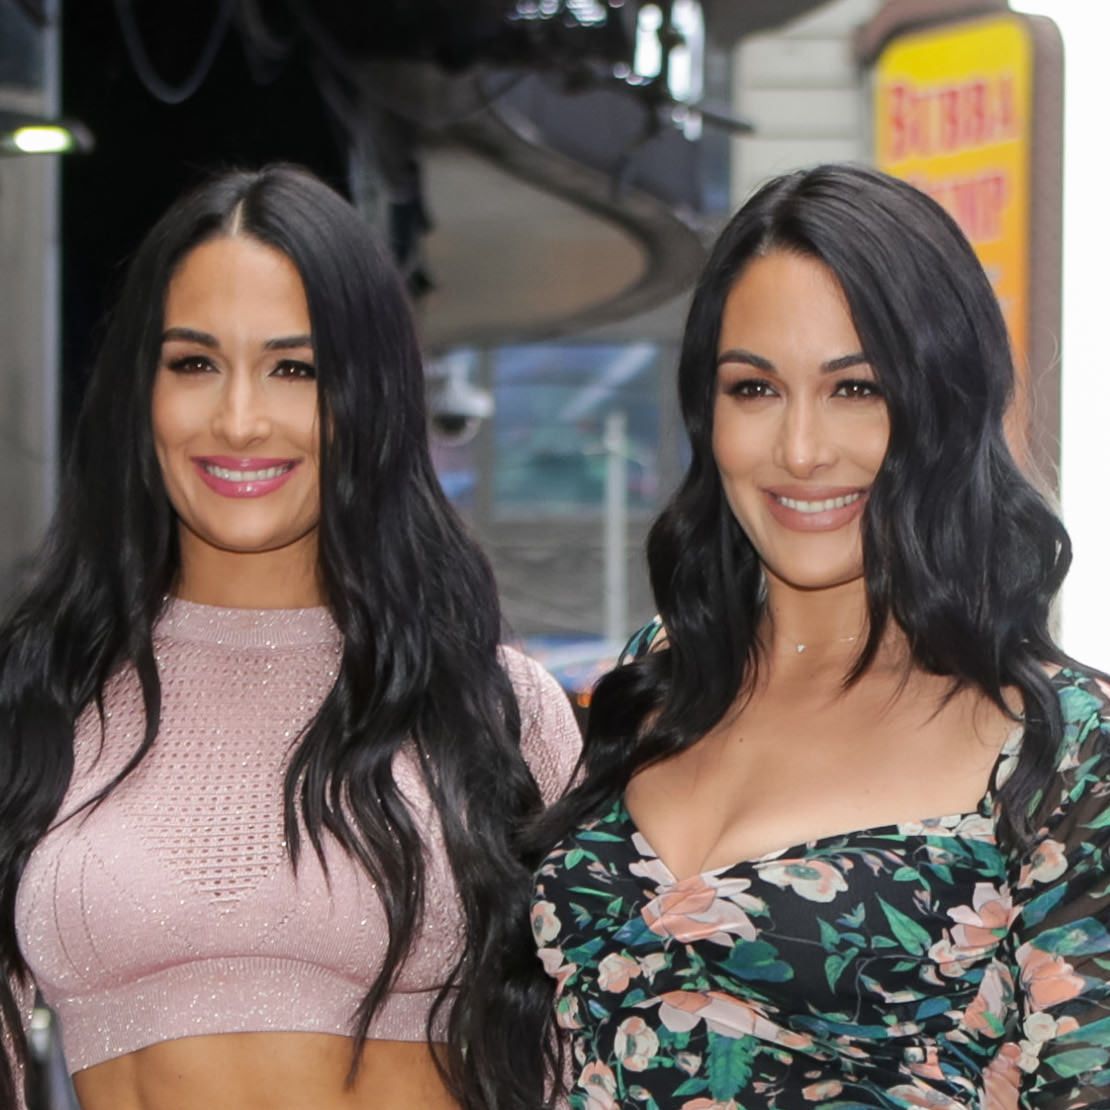 Photos from The Bella Twins' Sexiest Pics - Page 3